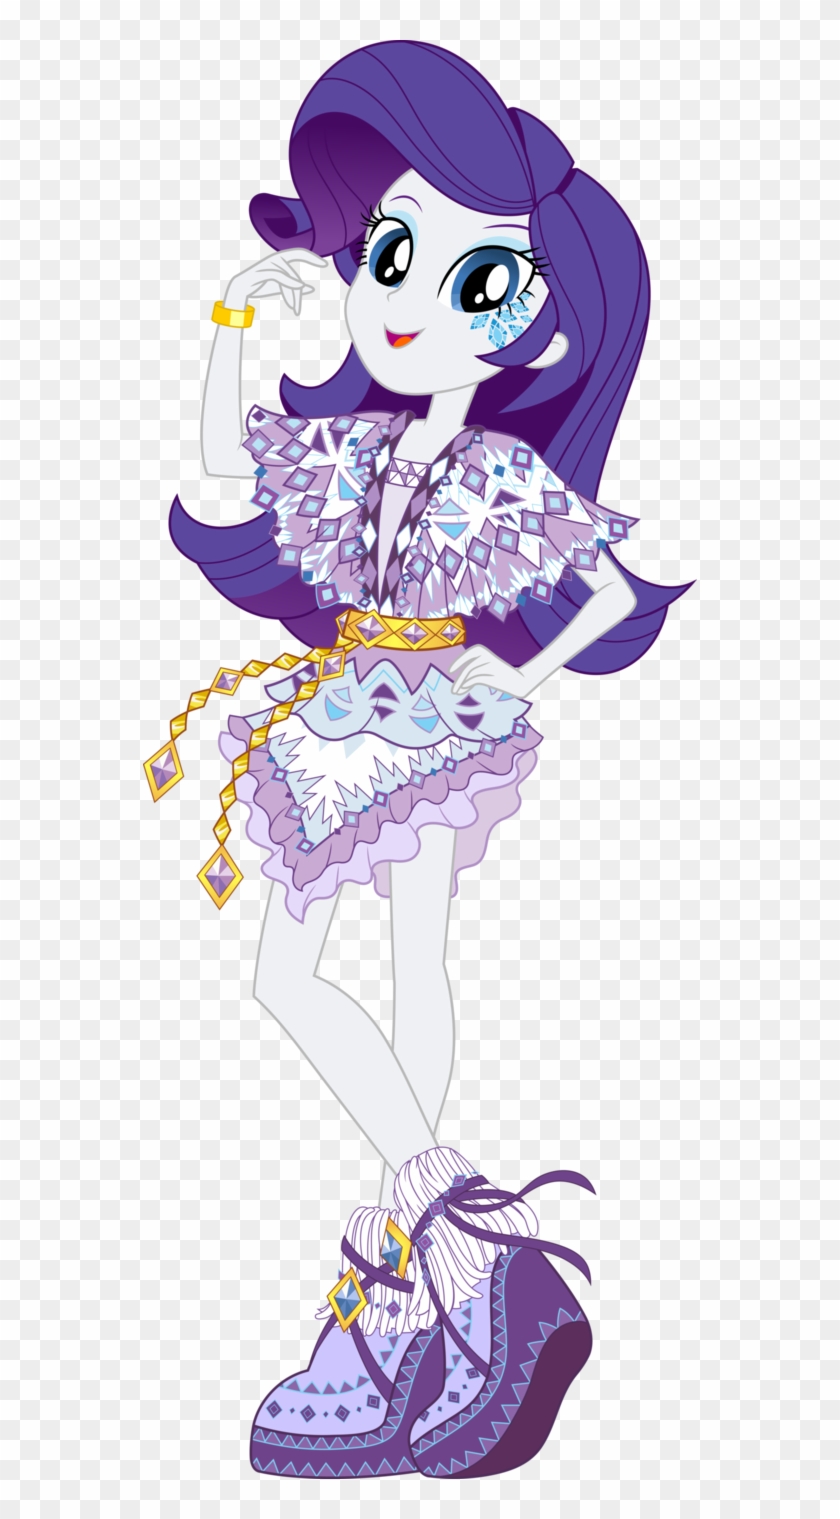 Legend Of Everfree Boho Rarity Vector By Icantunloveyou - Legend Of Everfree Rarity #602571